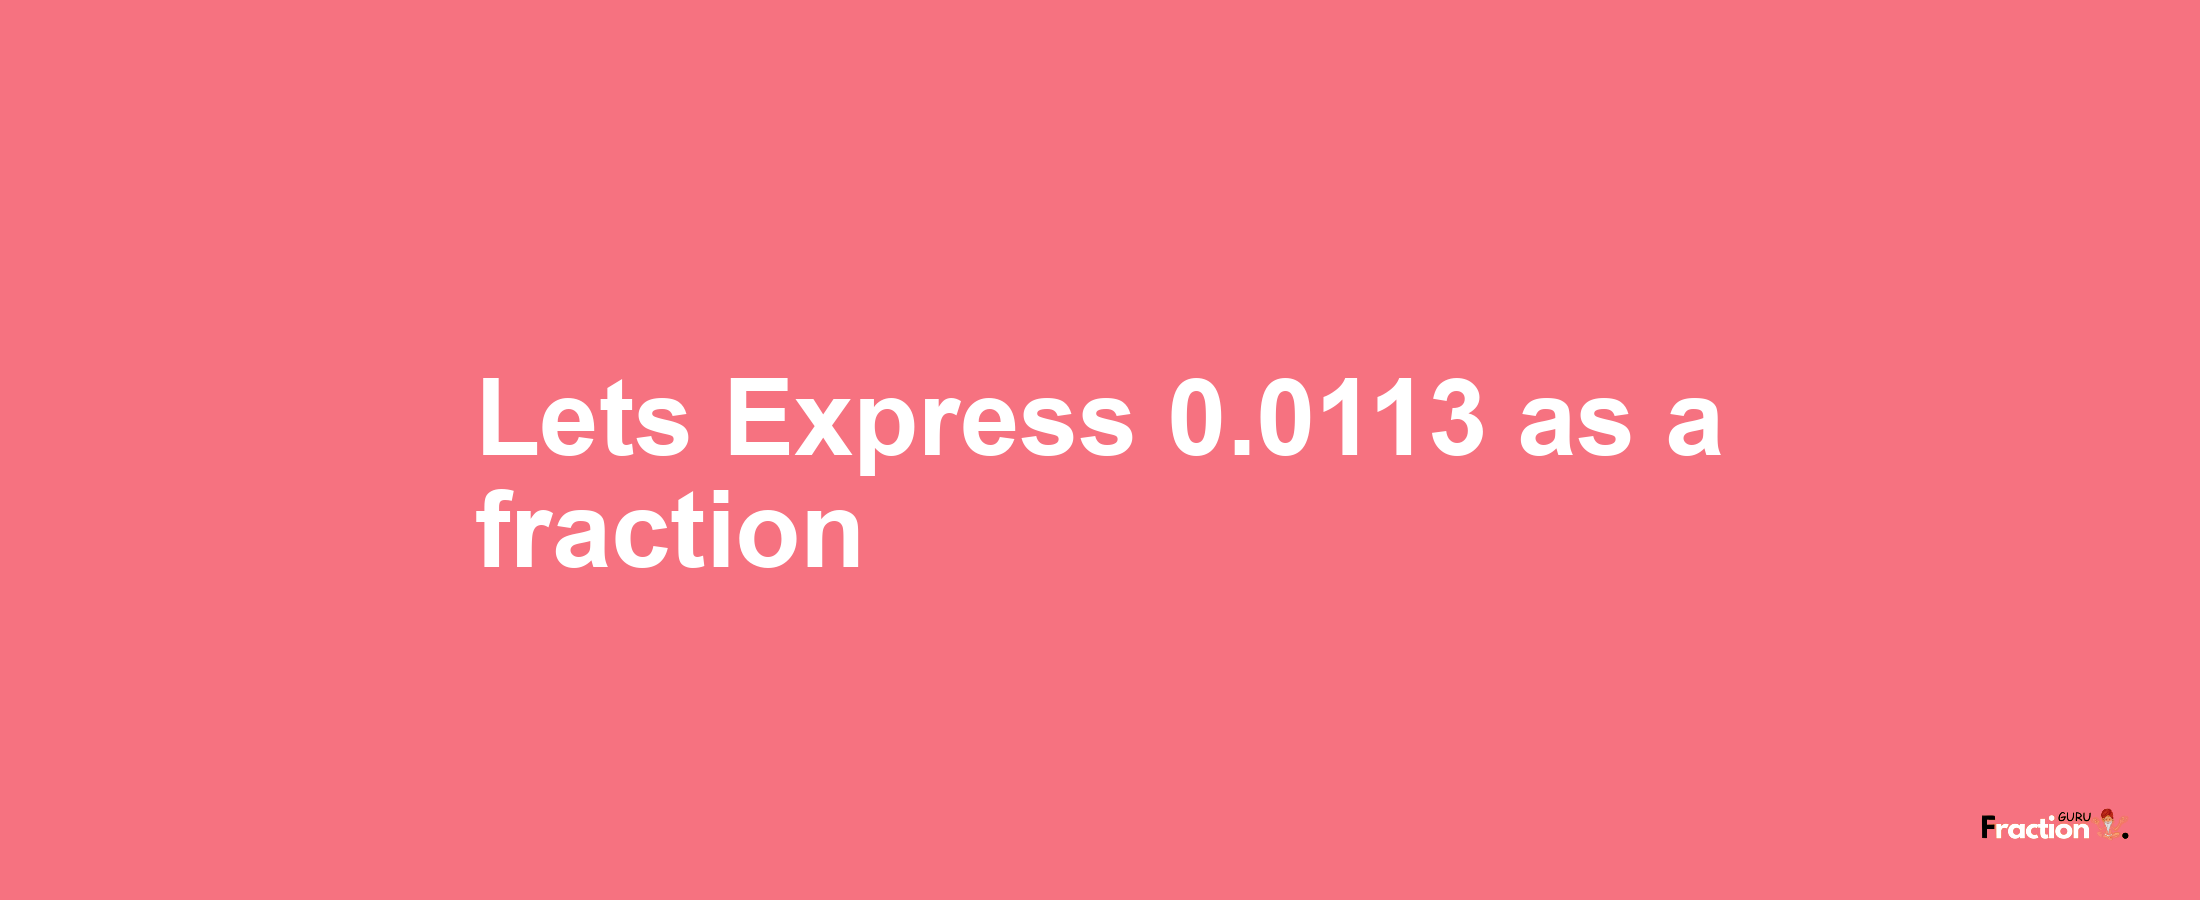 Lets Express 0.0113 as afraction